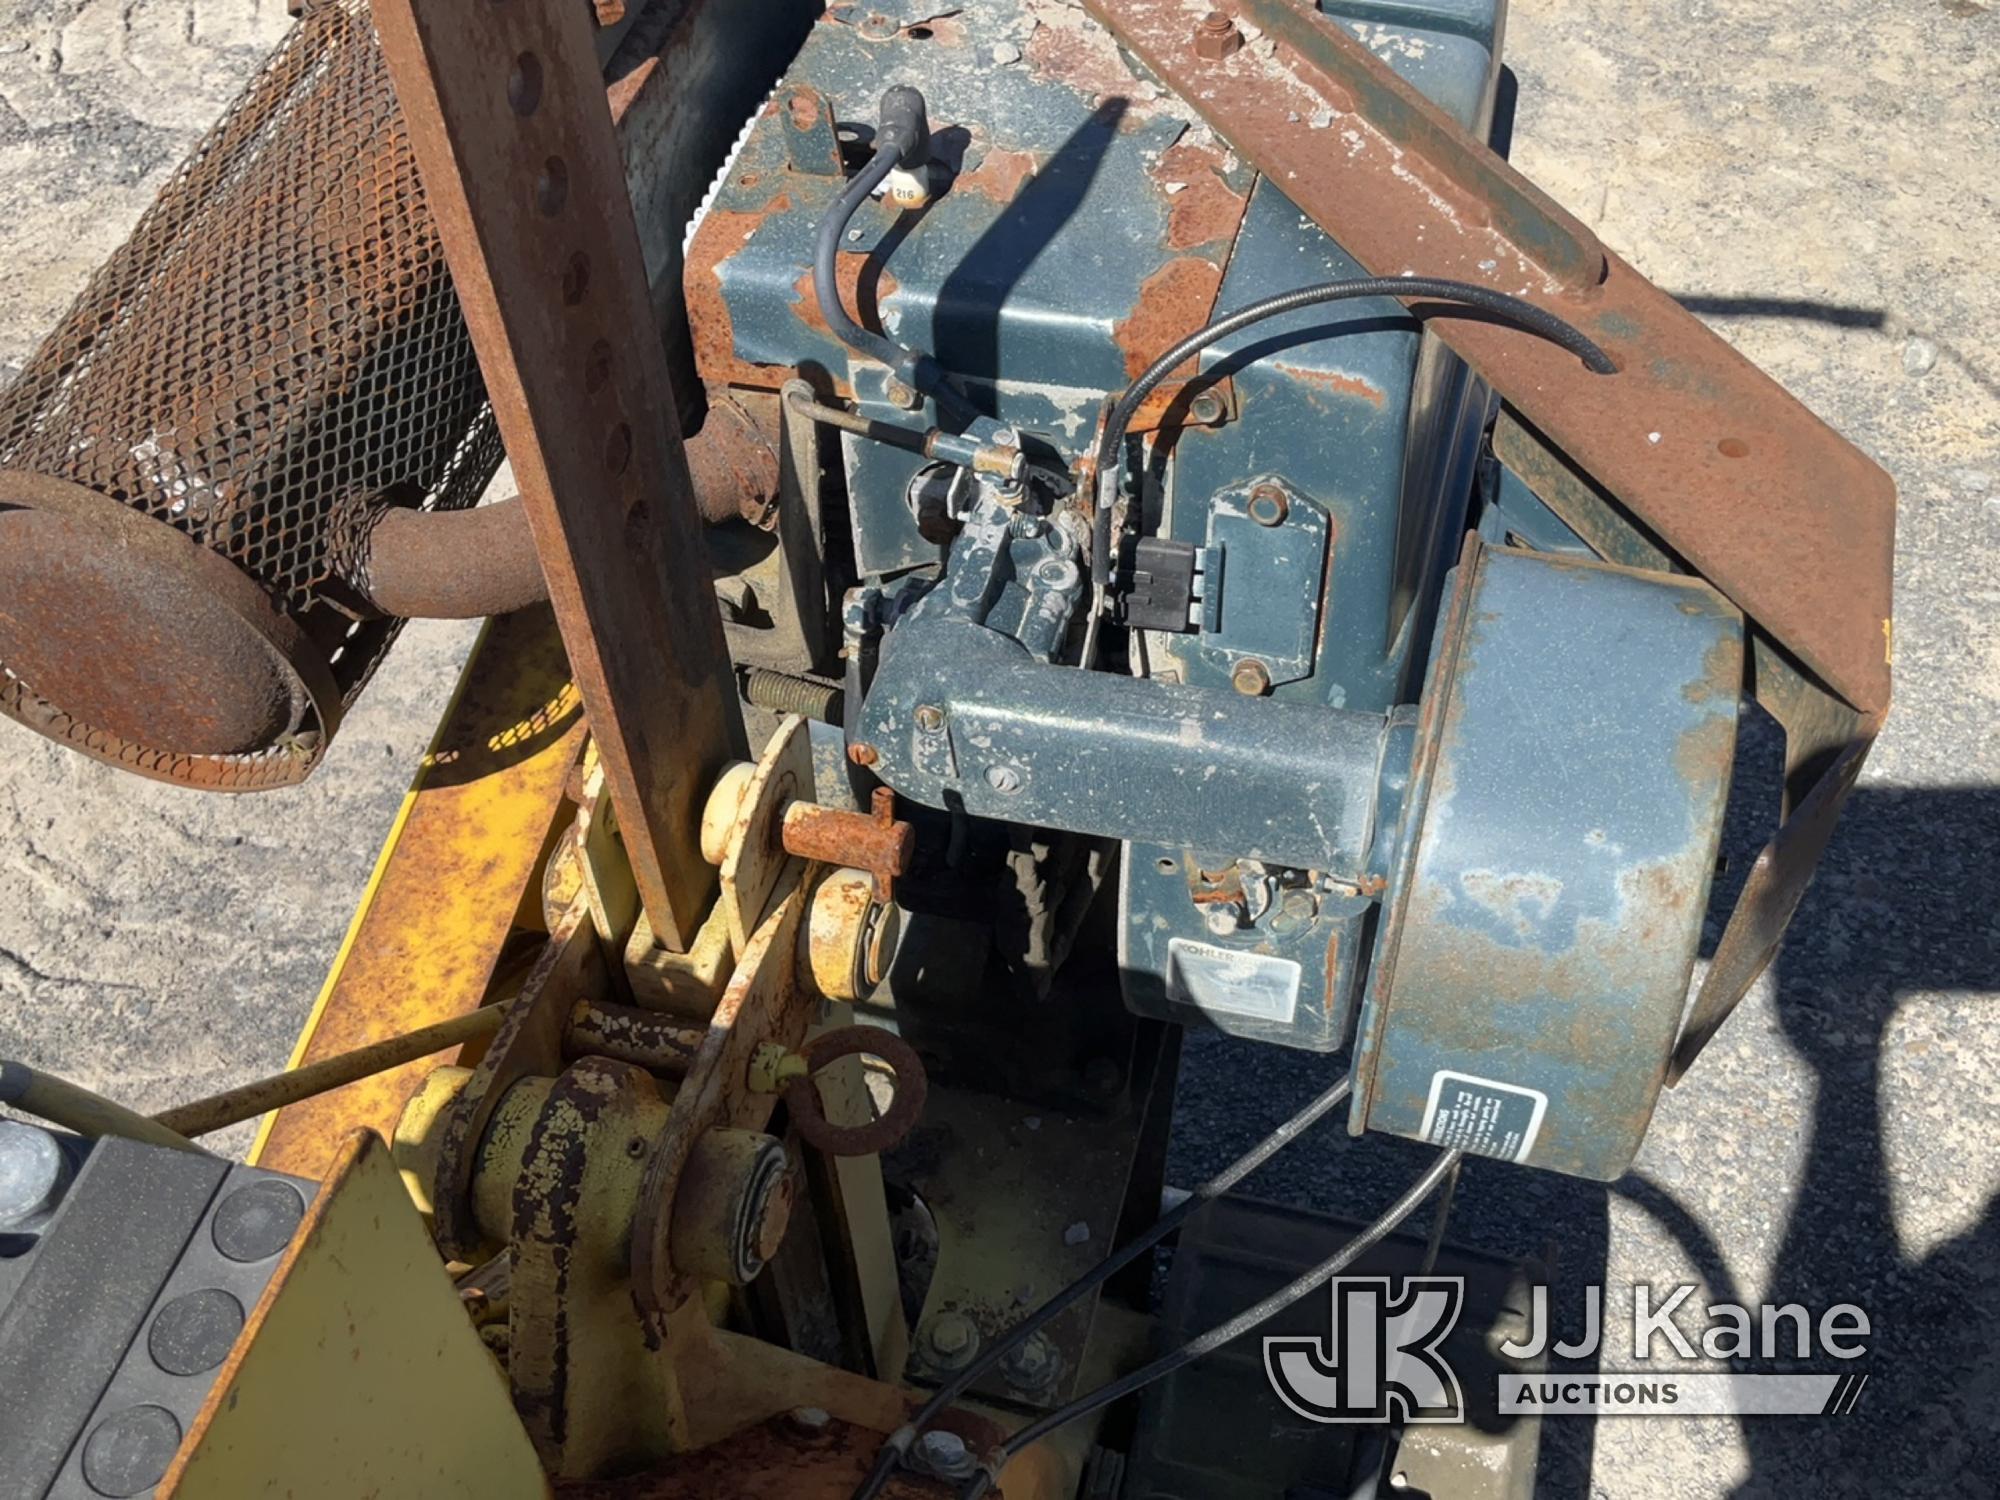 (Rome, NY) Line Ward Walk-Behind Crawler Cable Plow Not Running, Condition Unknown